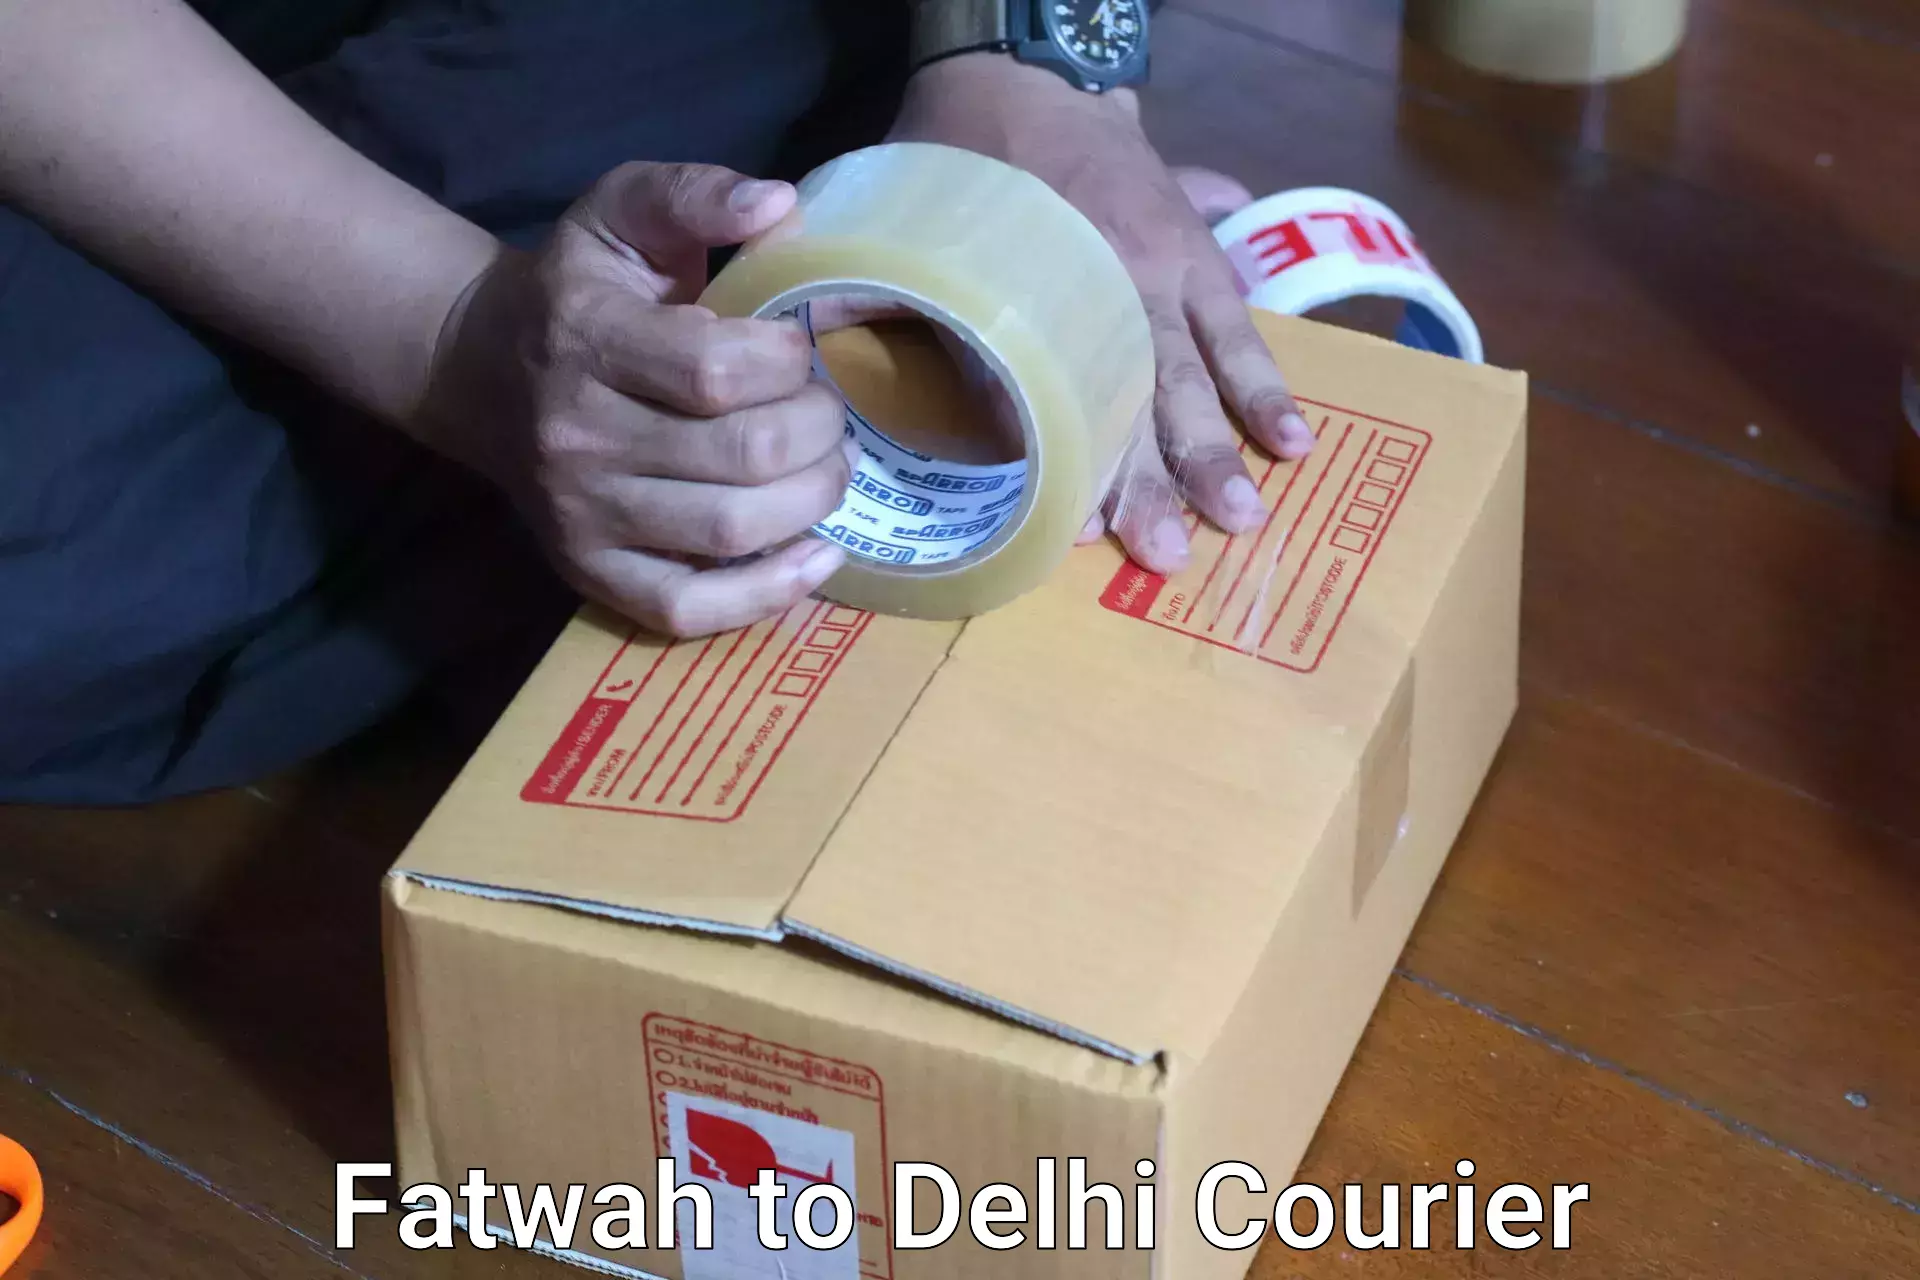 Luggage transfer service Fatwah to East Delhi